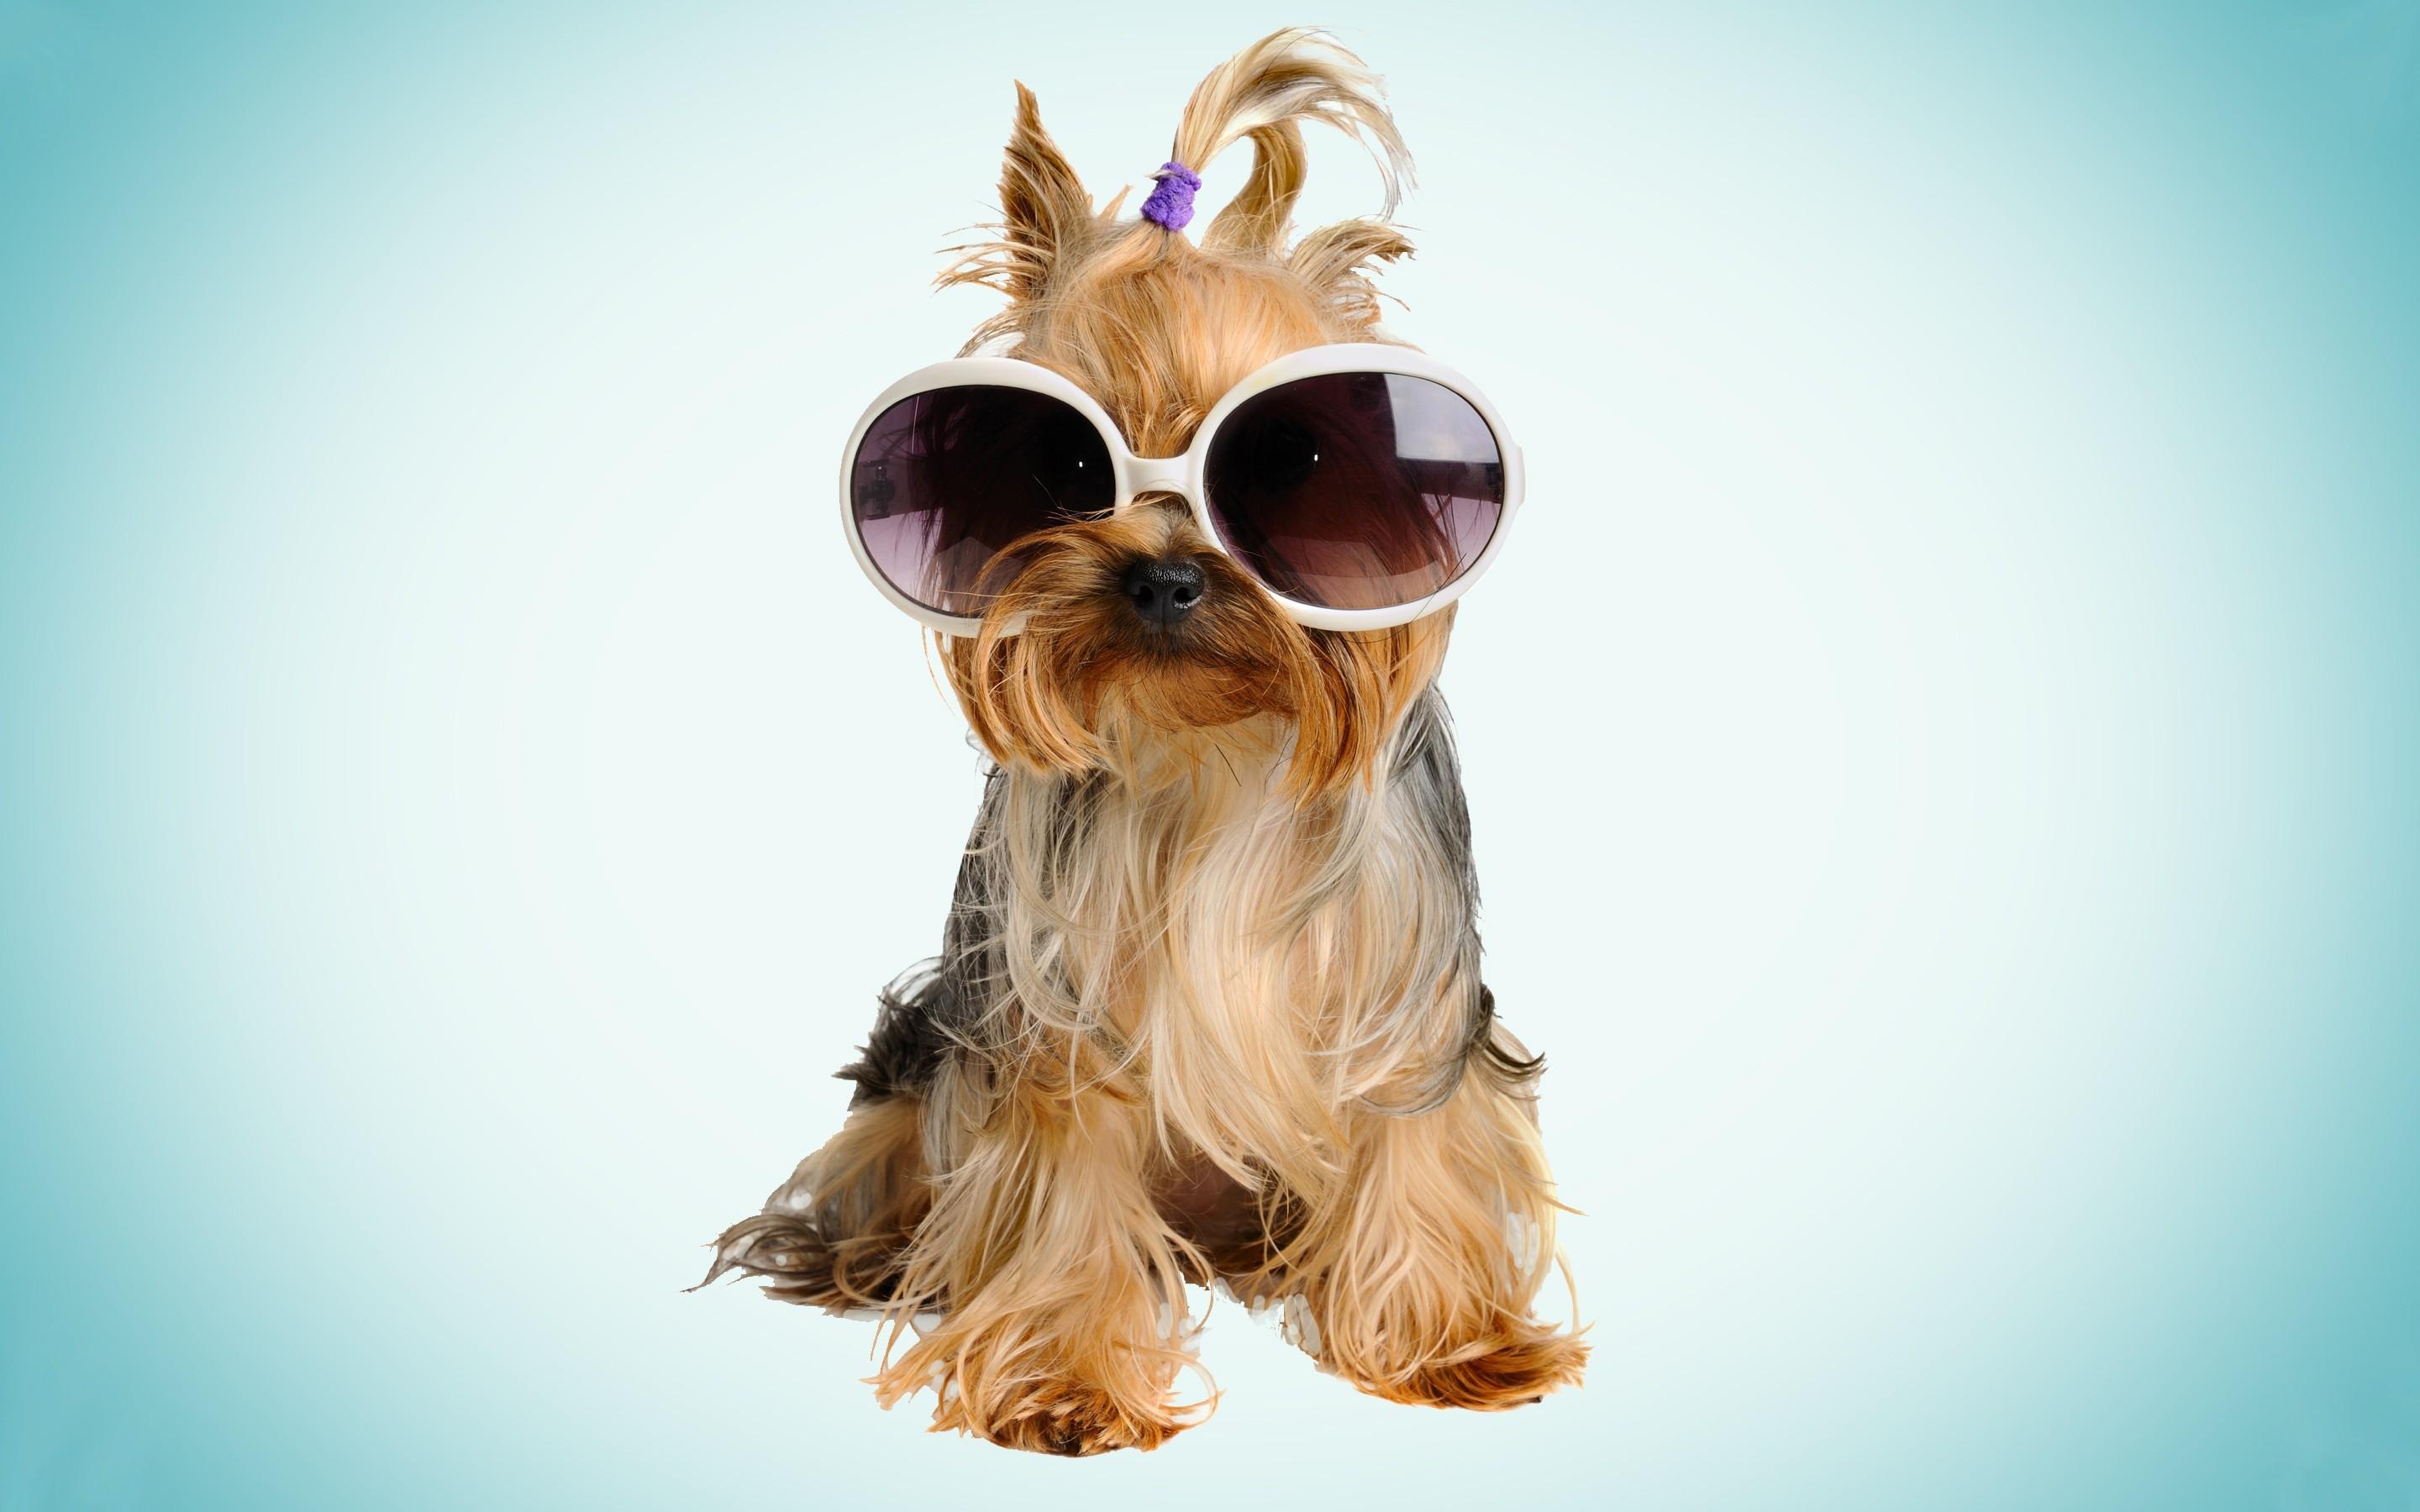 Dog With Glasses Wallpaper High Quality